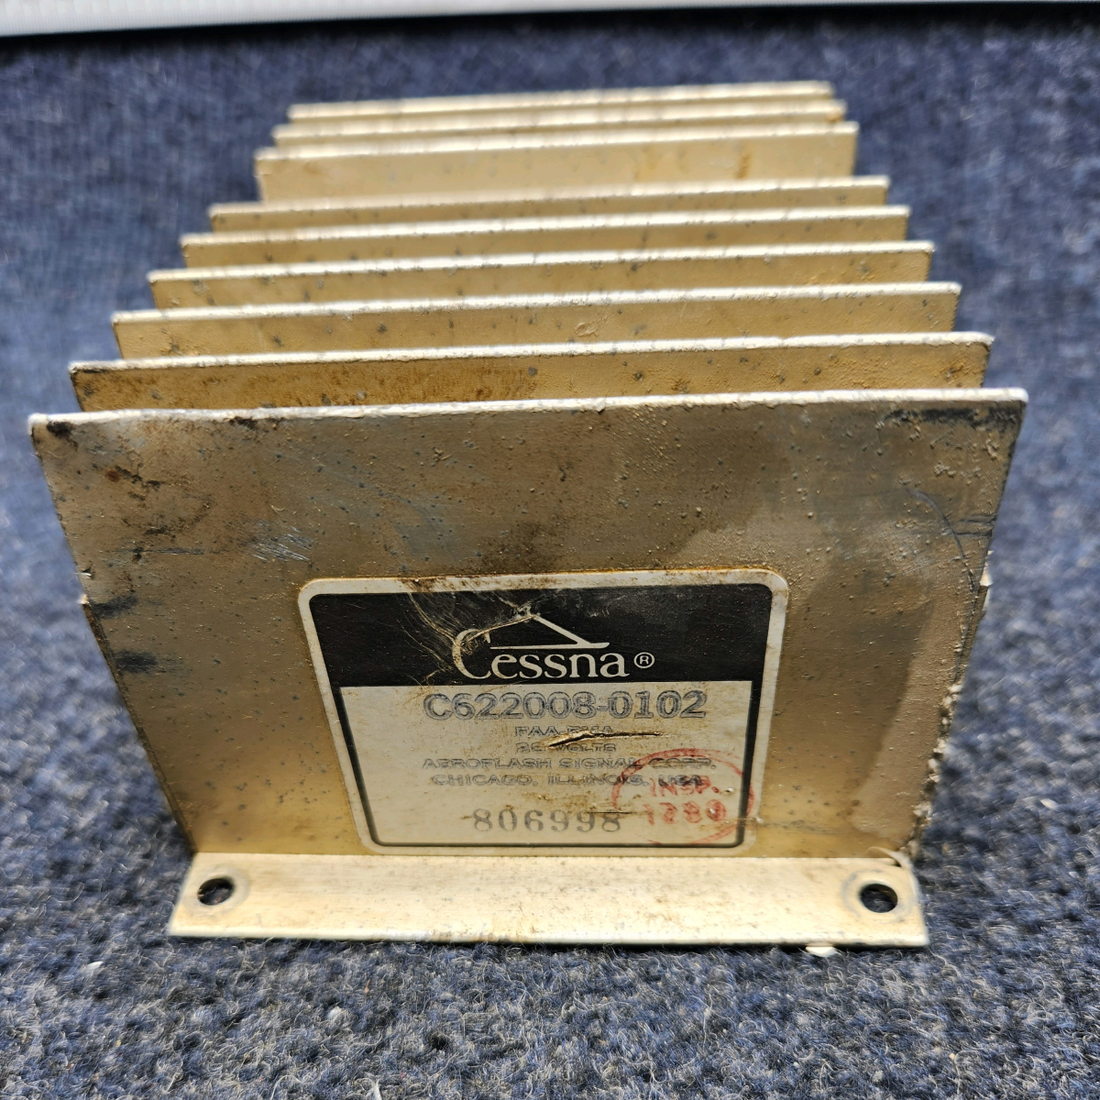 Used aircraft parts for sale, C622008-0102 Cessna Texas Several AEROFLASH STROBE POWER SUPPLY (VOLTS: 28)